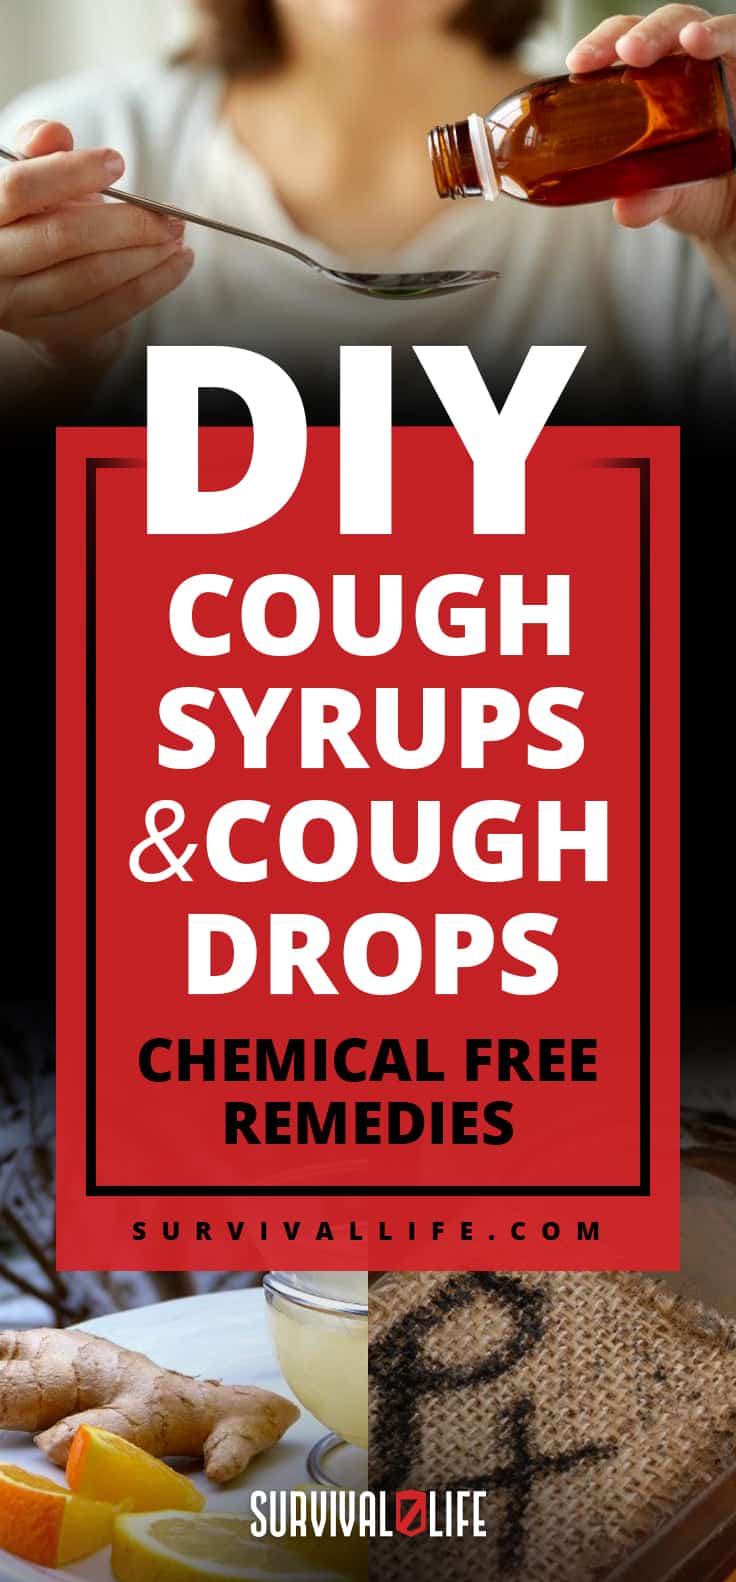 DIY Cough Syrups and Cough Drops | Chemical Free Remedies